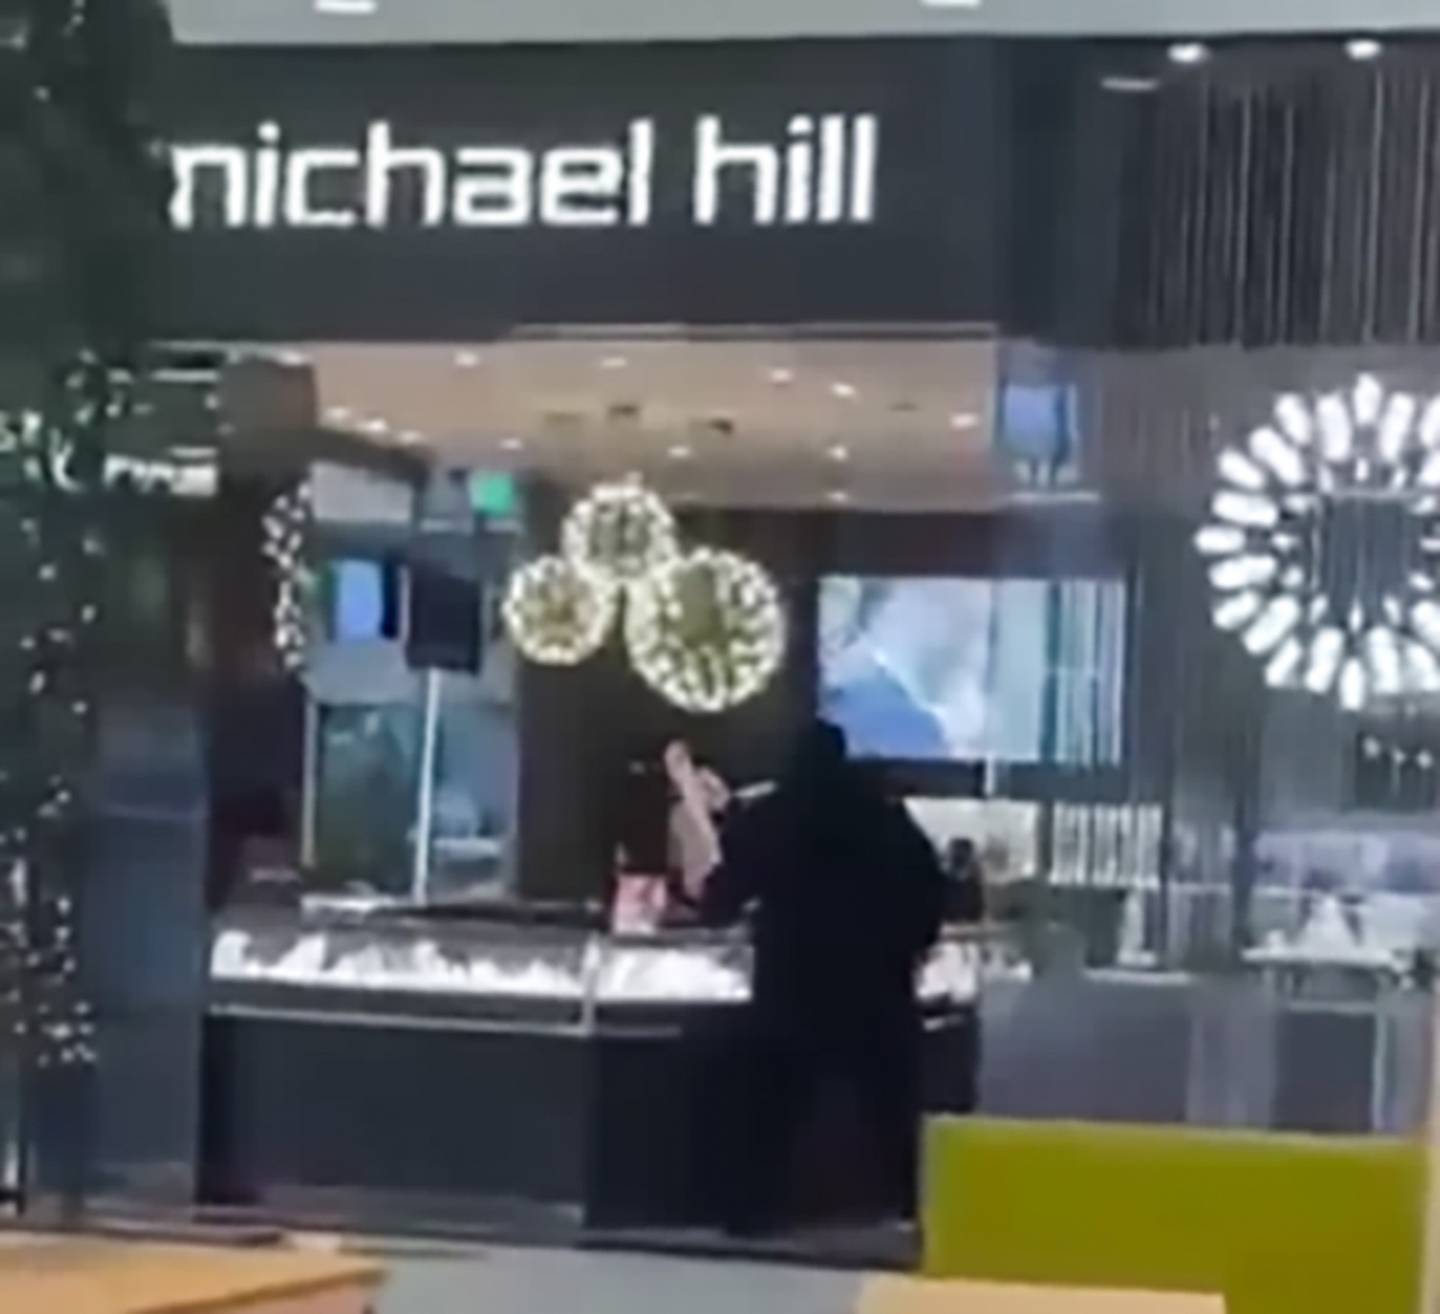 A person was caught on film stealing from a West Auckland Michael Hill Jewellers store last week. Photo / Supplied